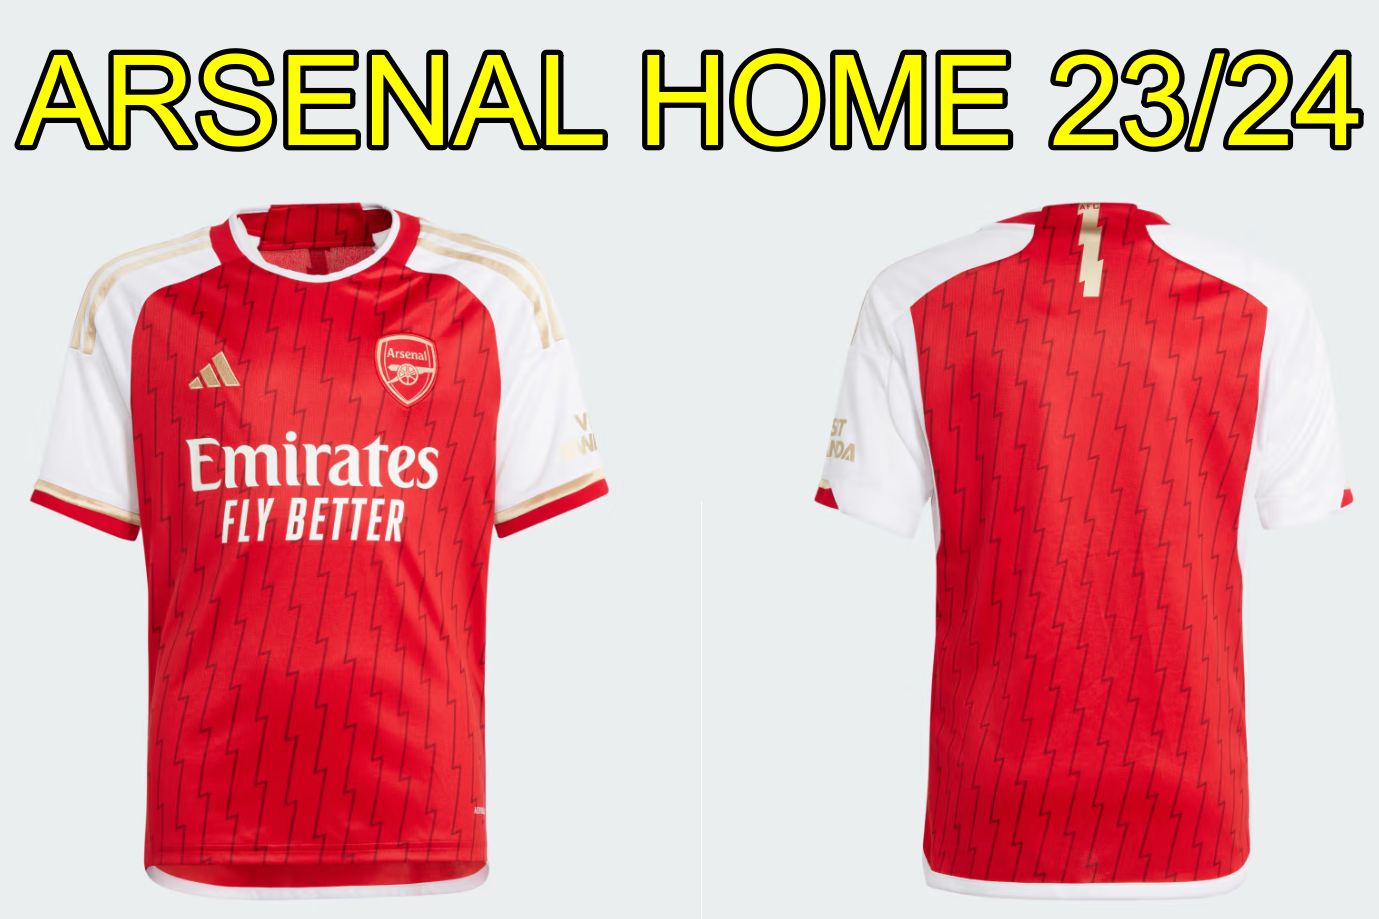 Arsenal Red SQ.png